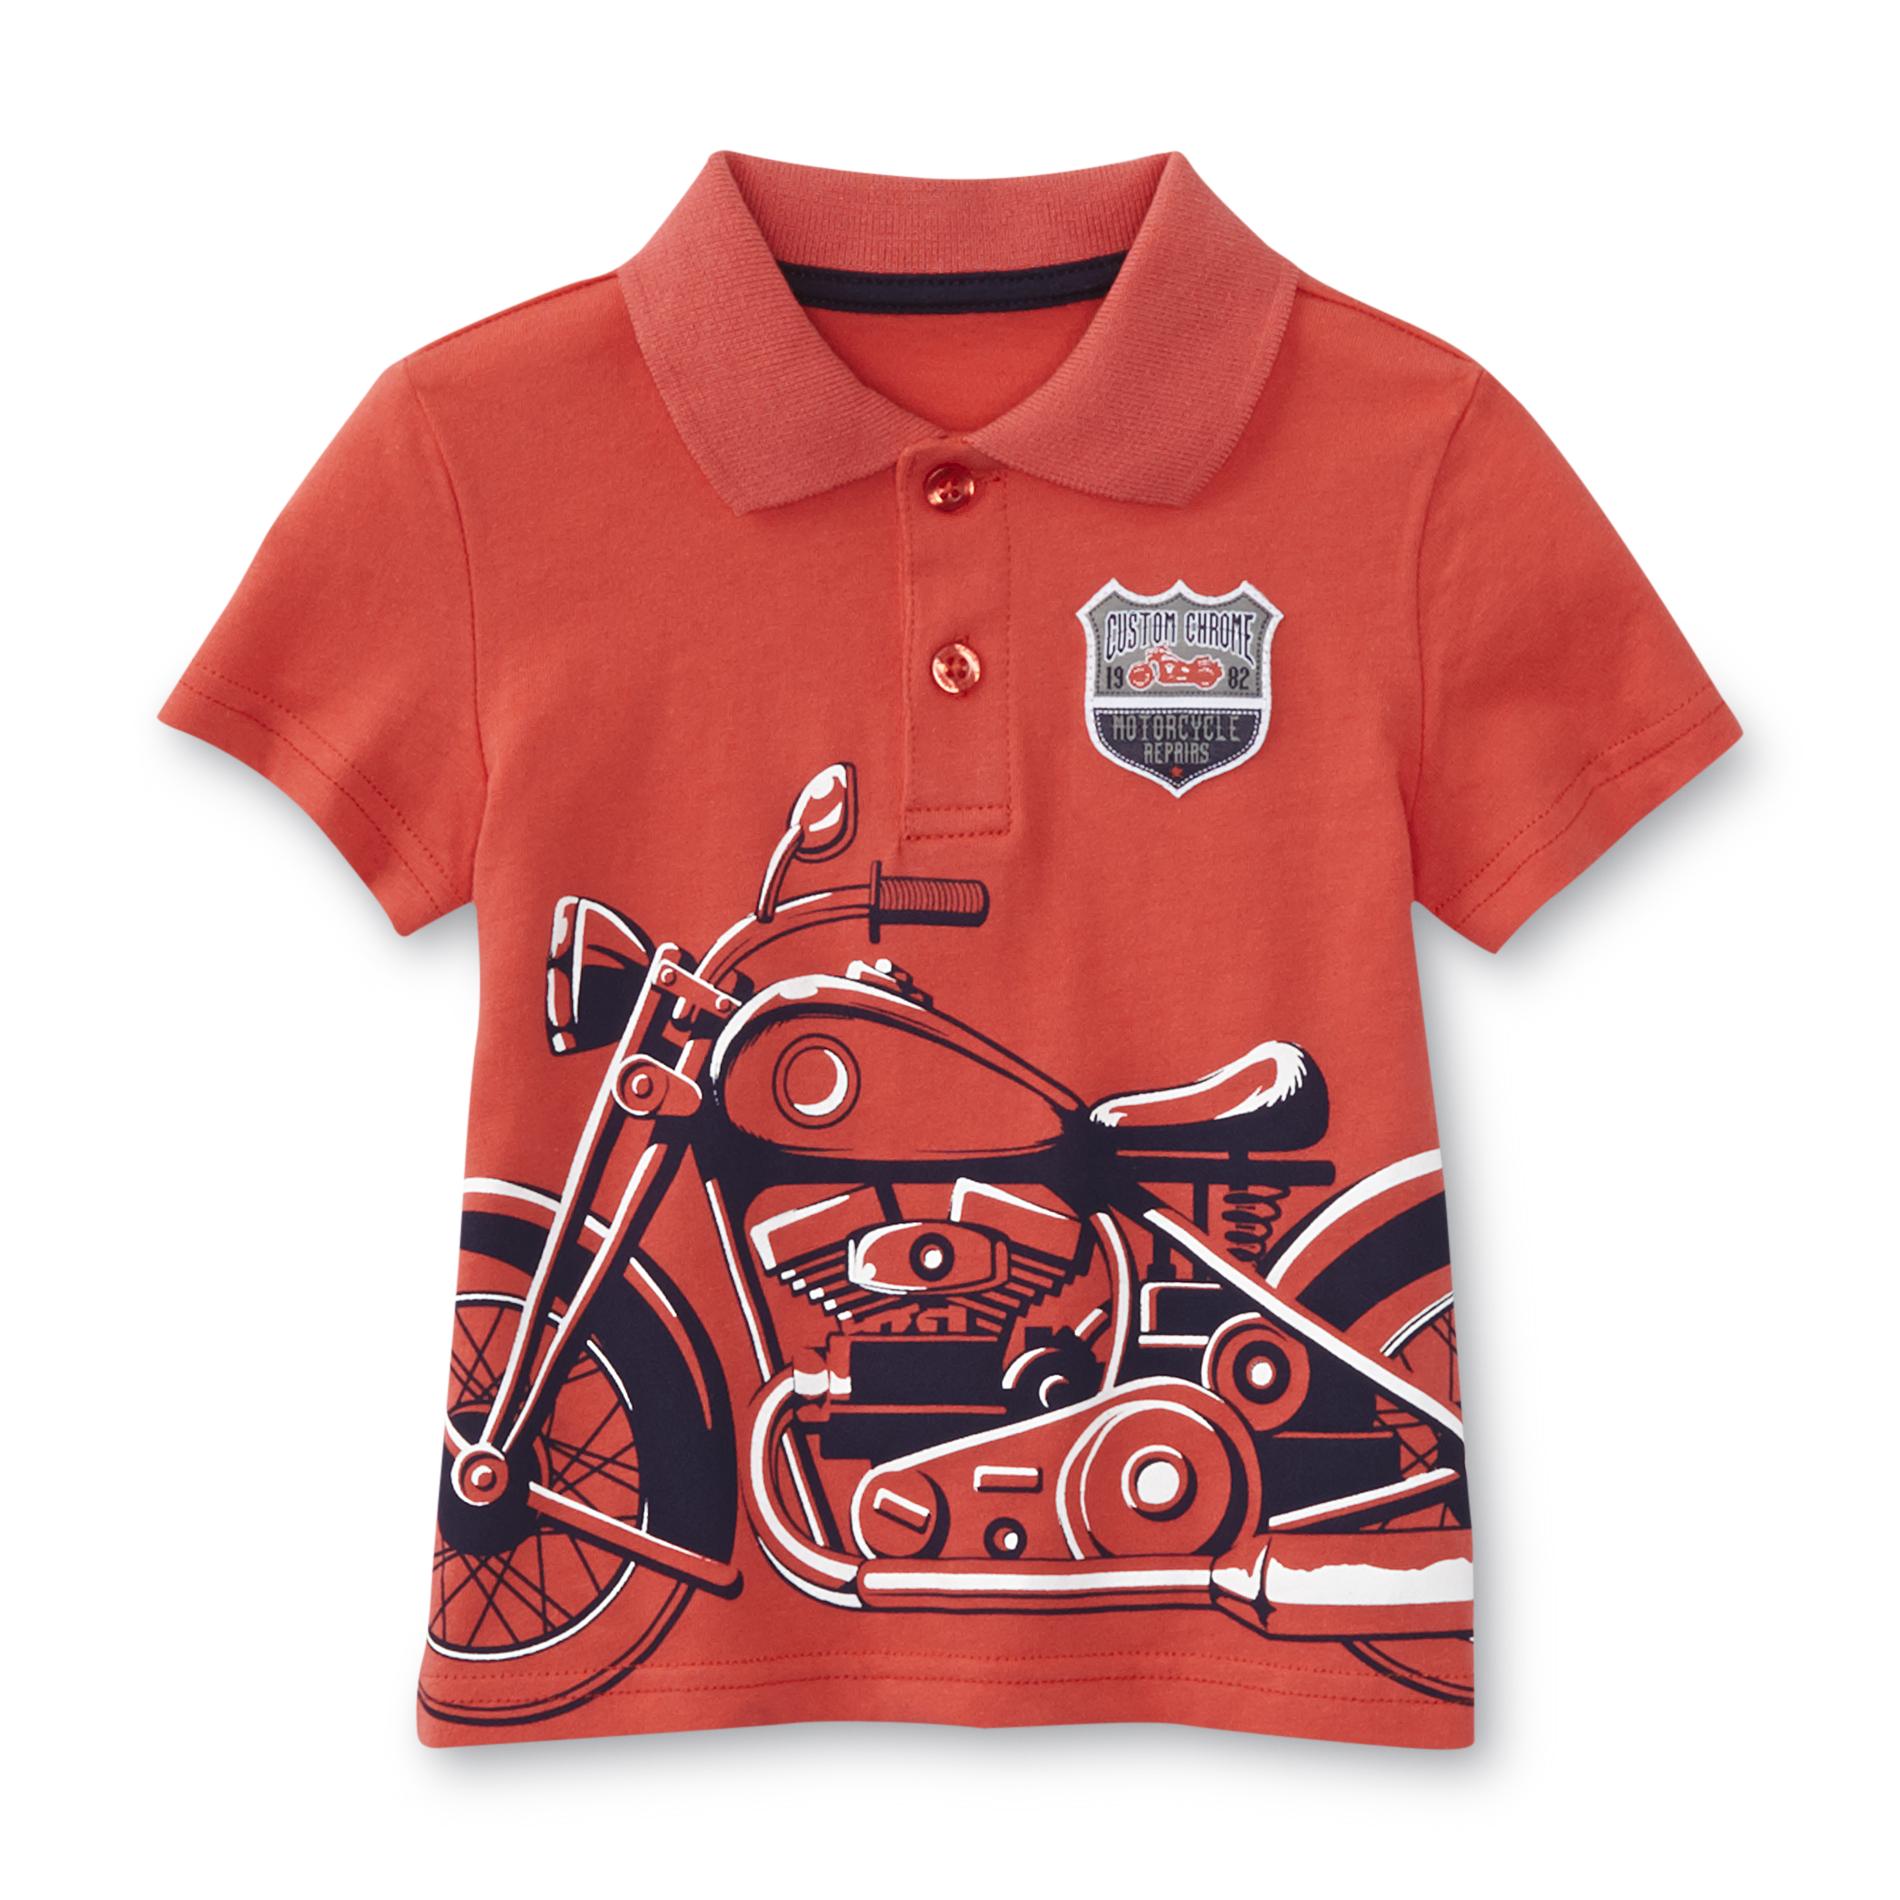 Toughskins Infant & Toddler Boy's Graphic Polo Shirt - Motorcycle